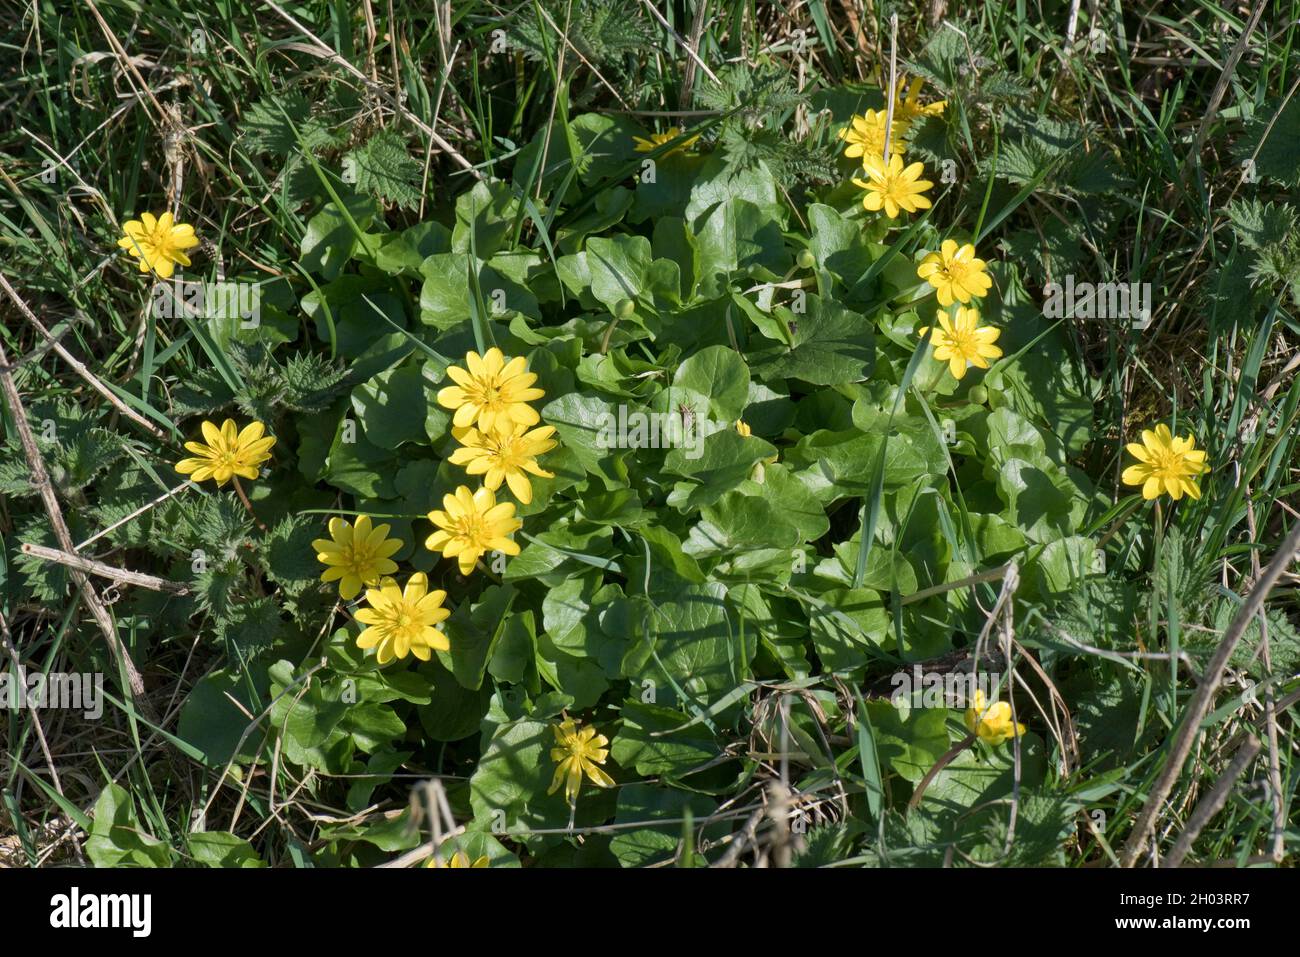 Lesser celandine (Ficaria verna) yellow, buttercup type plants plant flowering in early spring, Berkshire, March Stock Photo